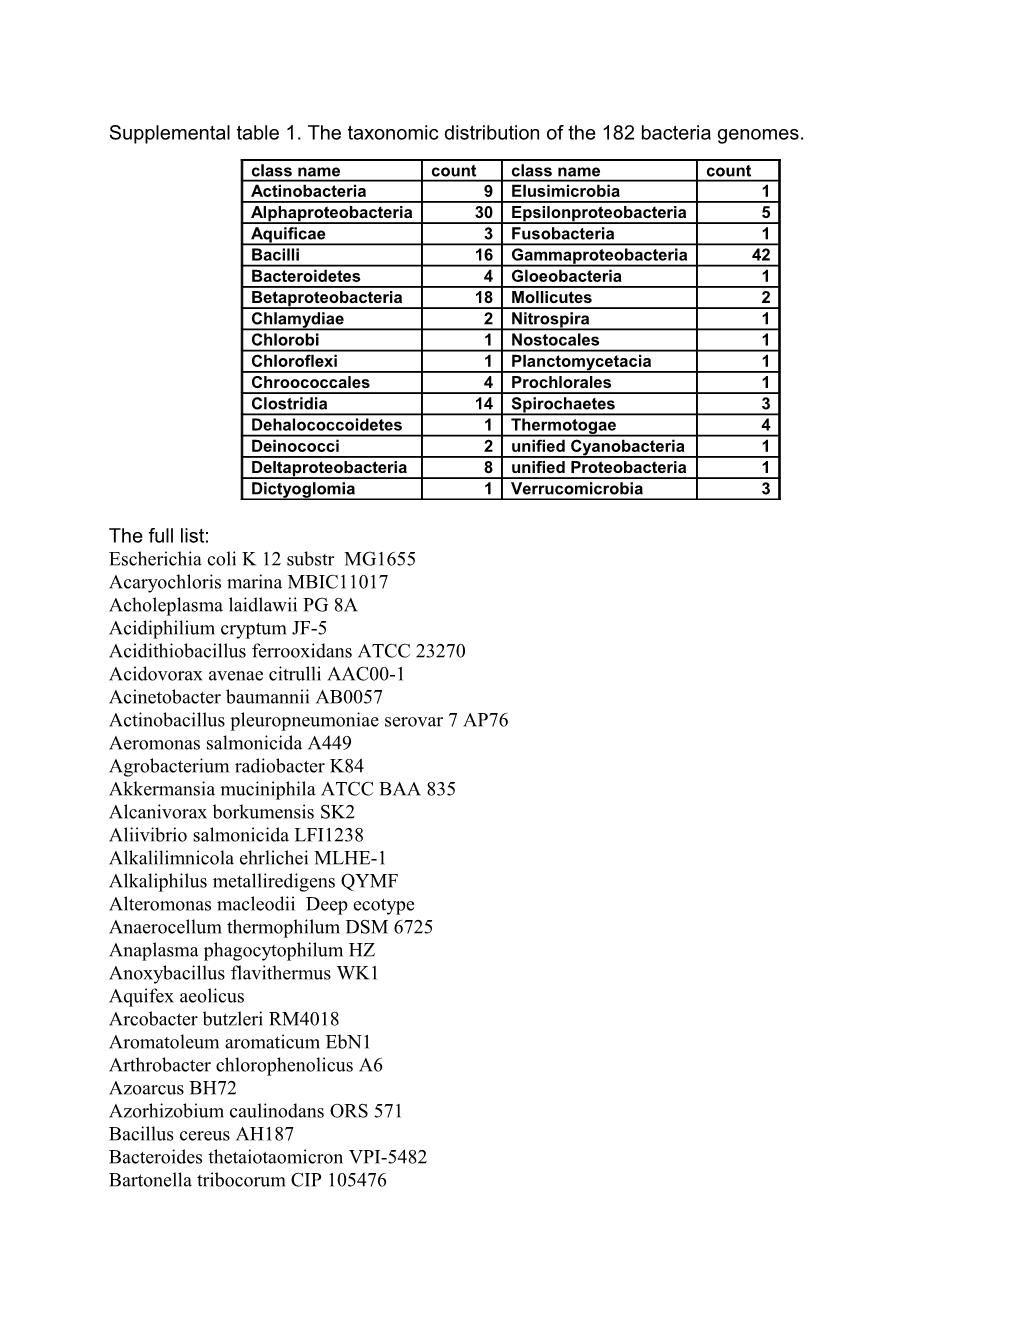 Supplemental Table 1. the Taxonomic Distribution of the 182 Bacteria Genomes